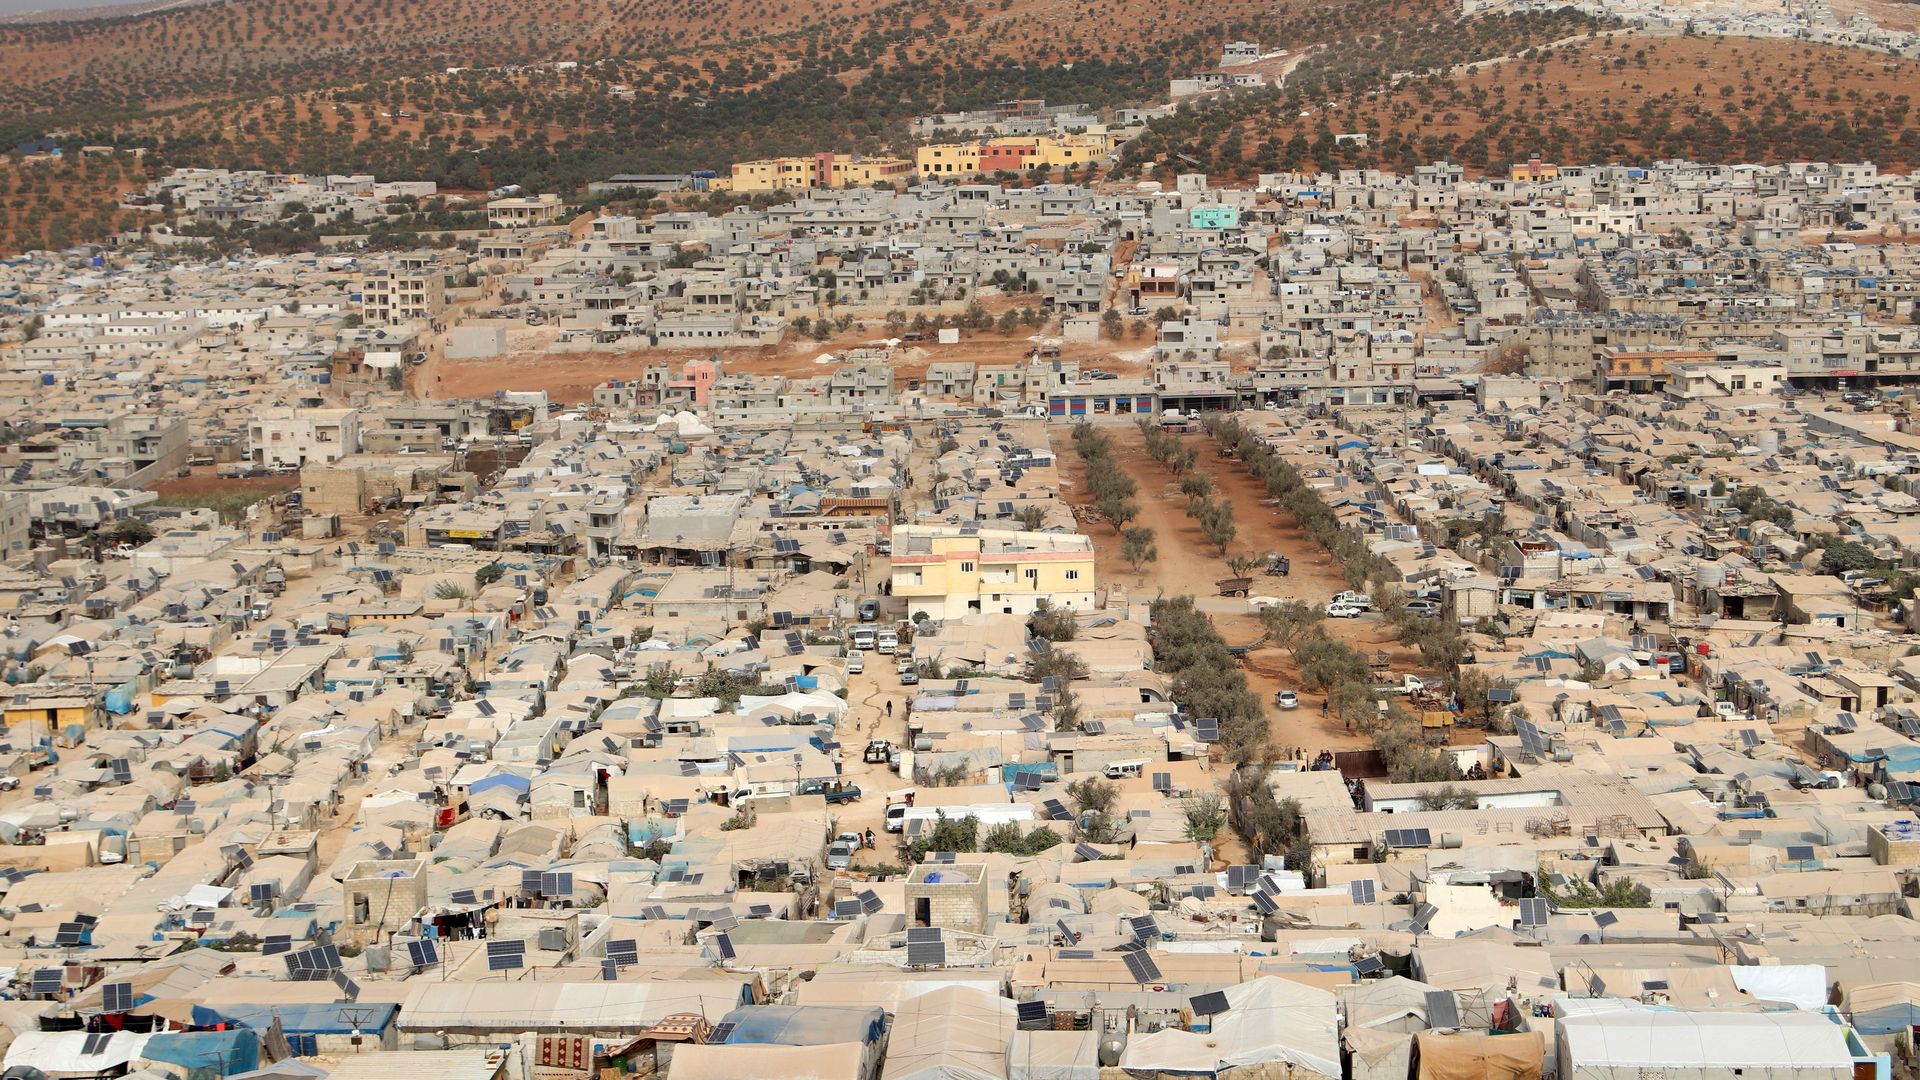 Photo of a sprawling displacement camp near the village of Qah in Syria